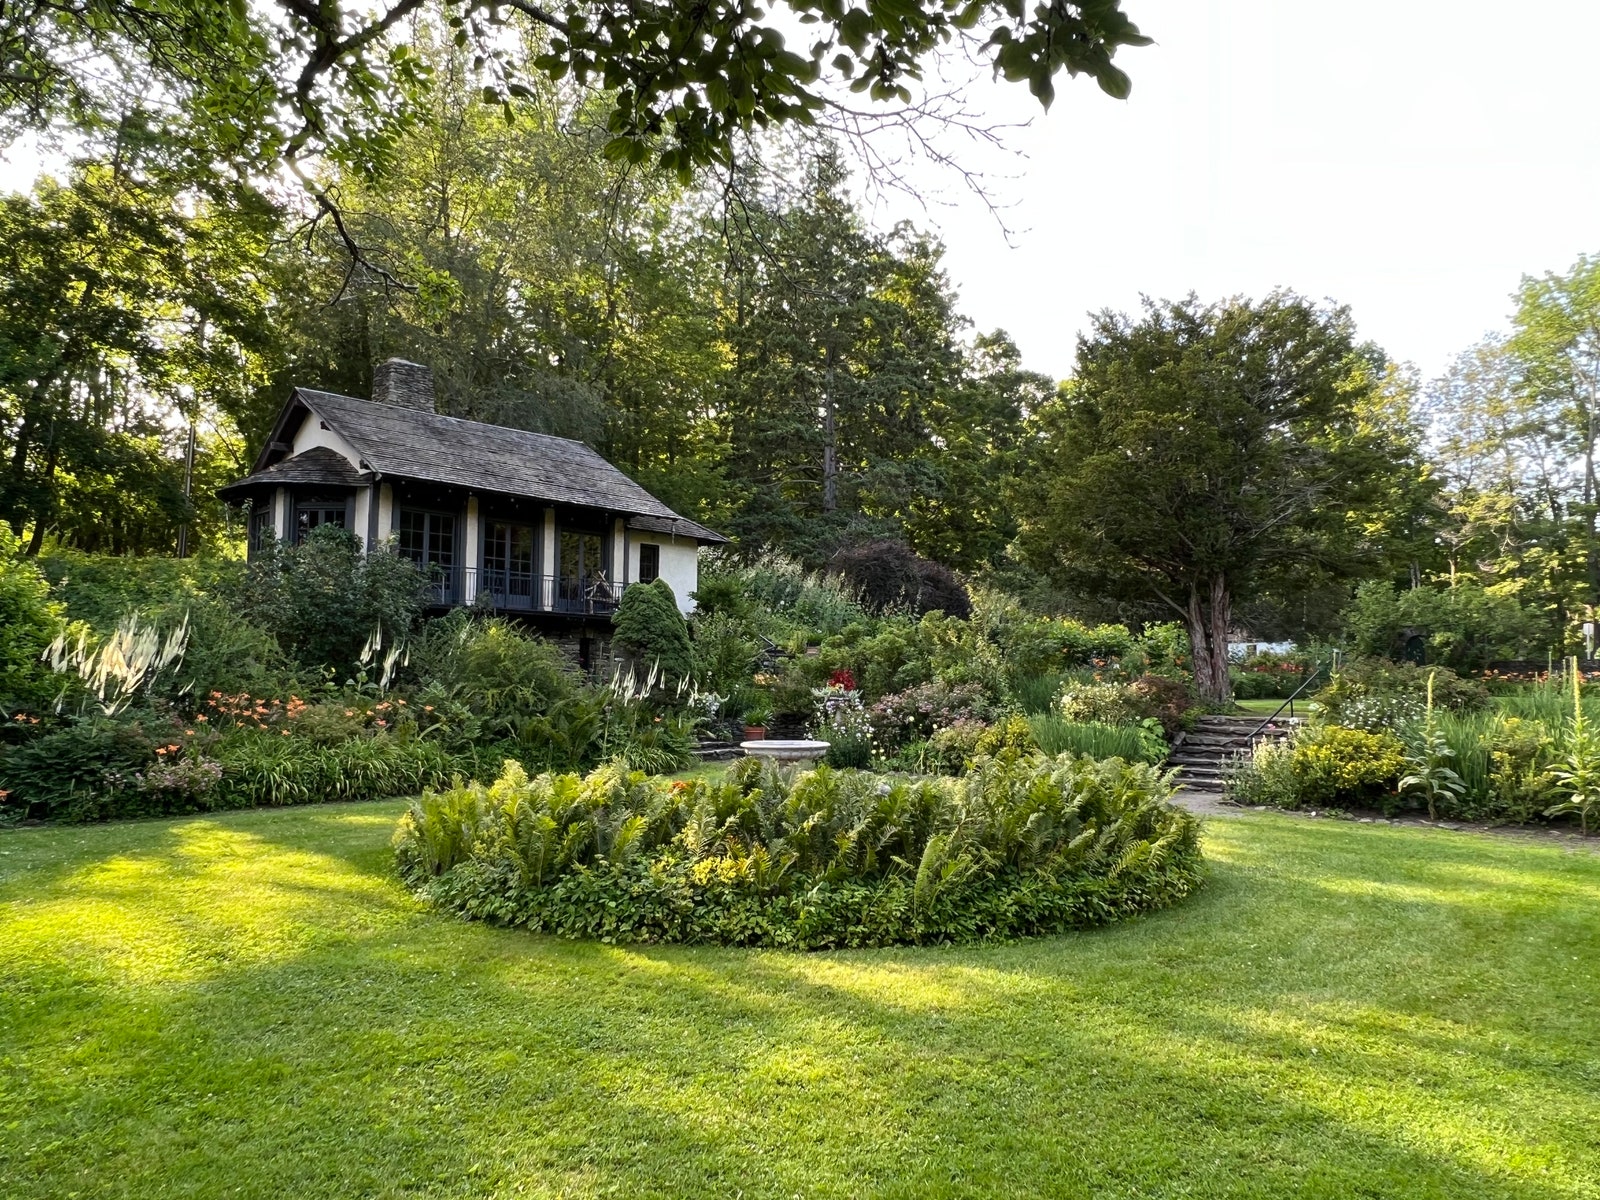 The rich literary history of Brookwood garden in Cooperstown